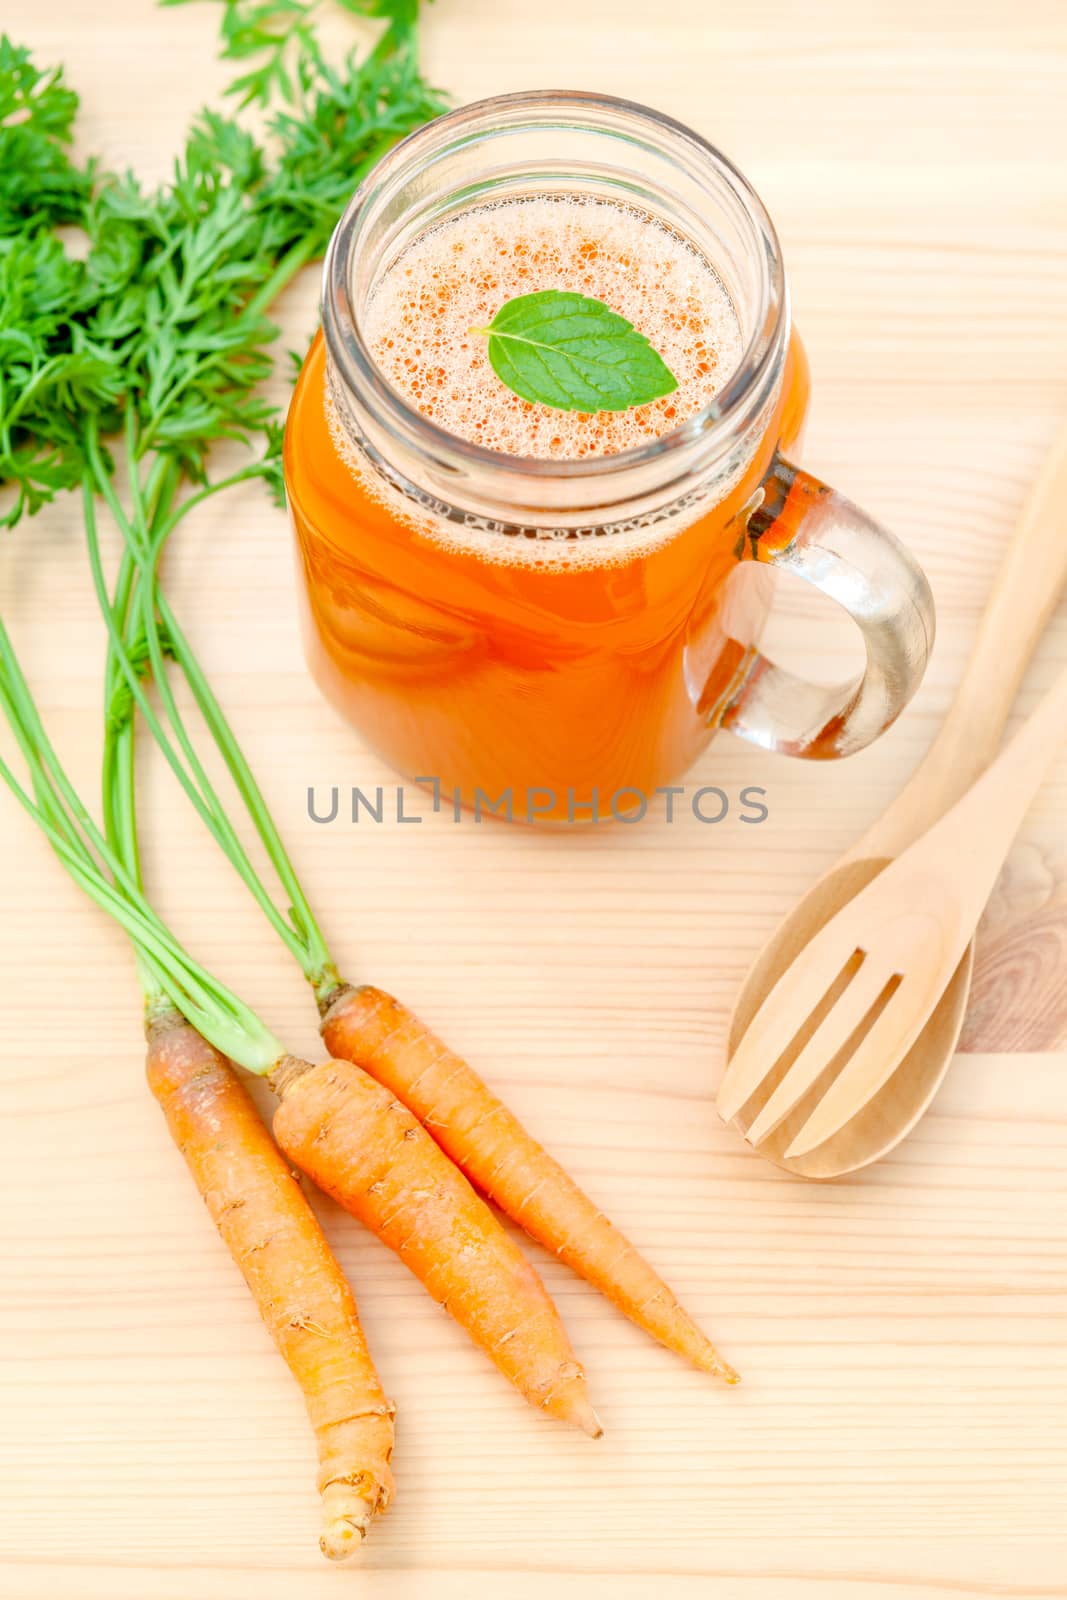 Glasses of carrot juice with carrot roots on wooden background.Glasses of tasty fresh carrot juice.Carrot juice and carrots. Selective focus dept of field.